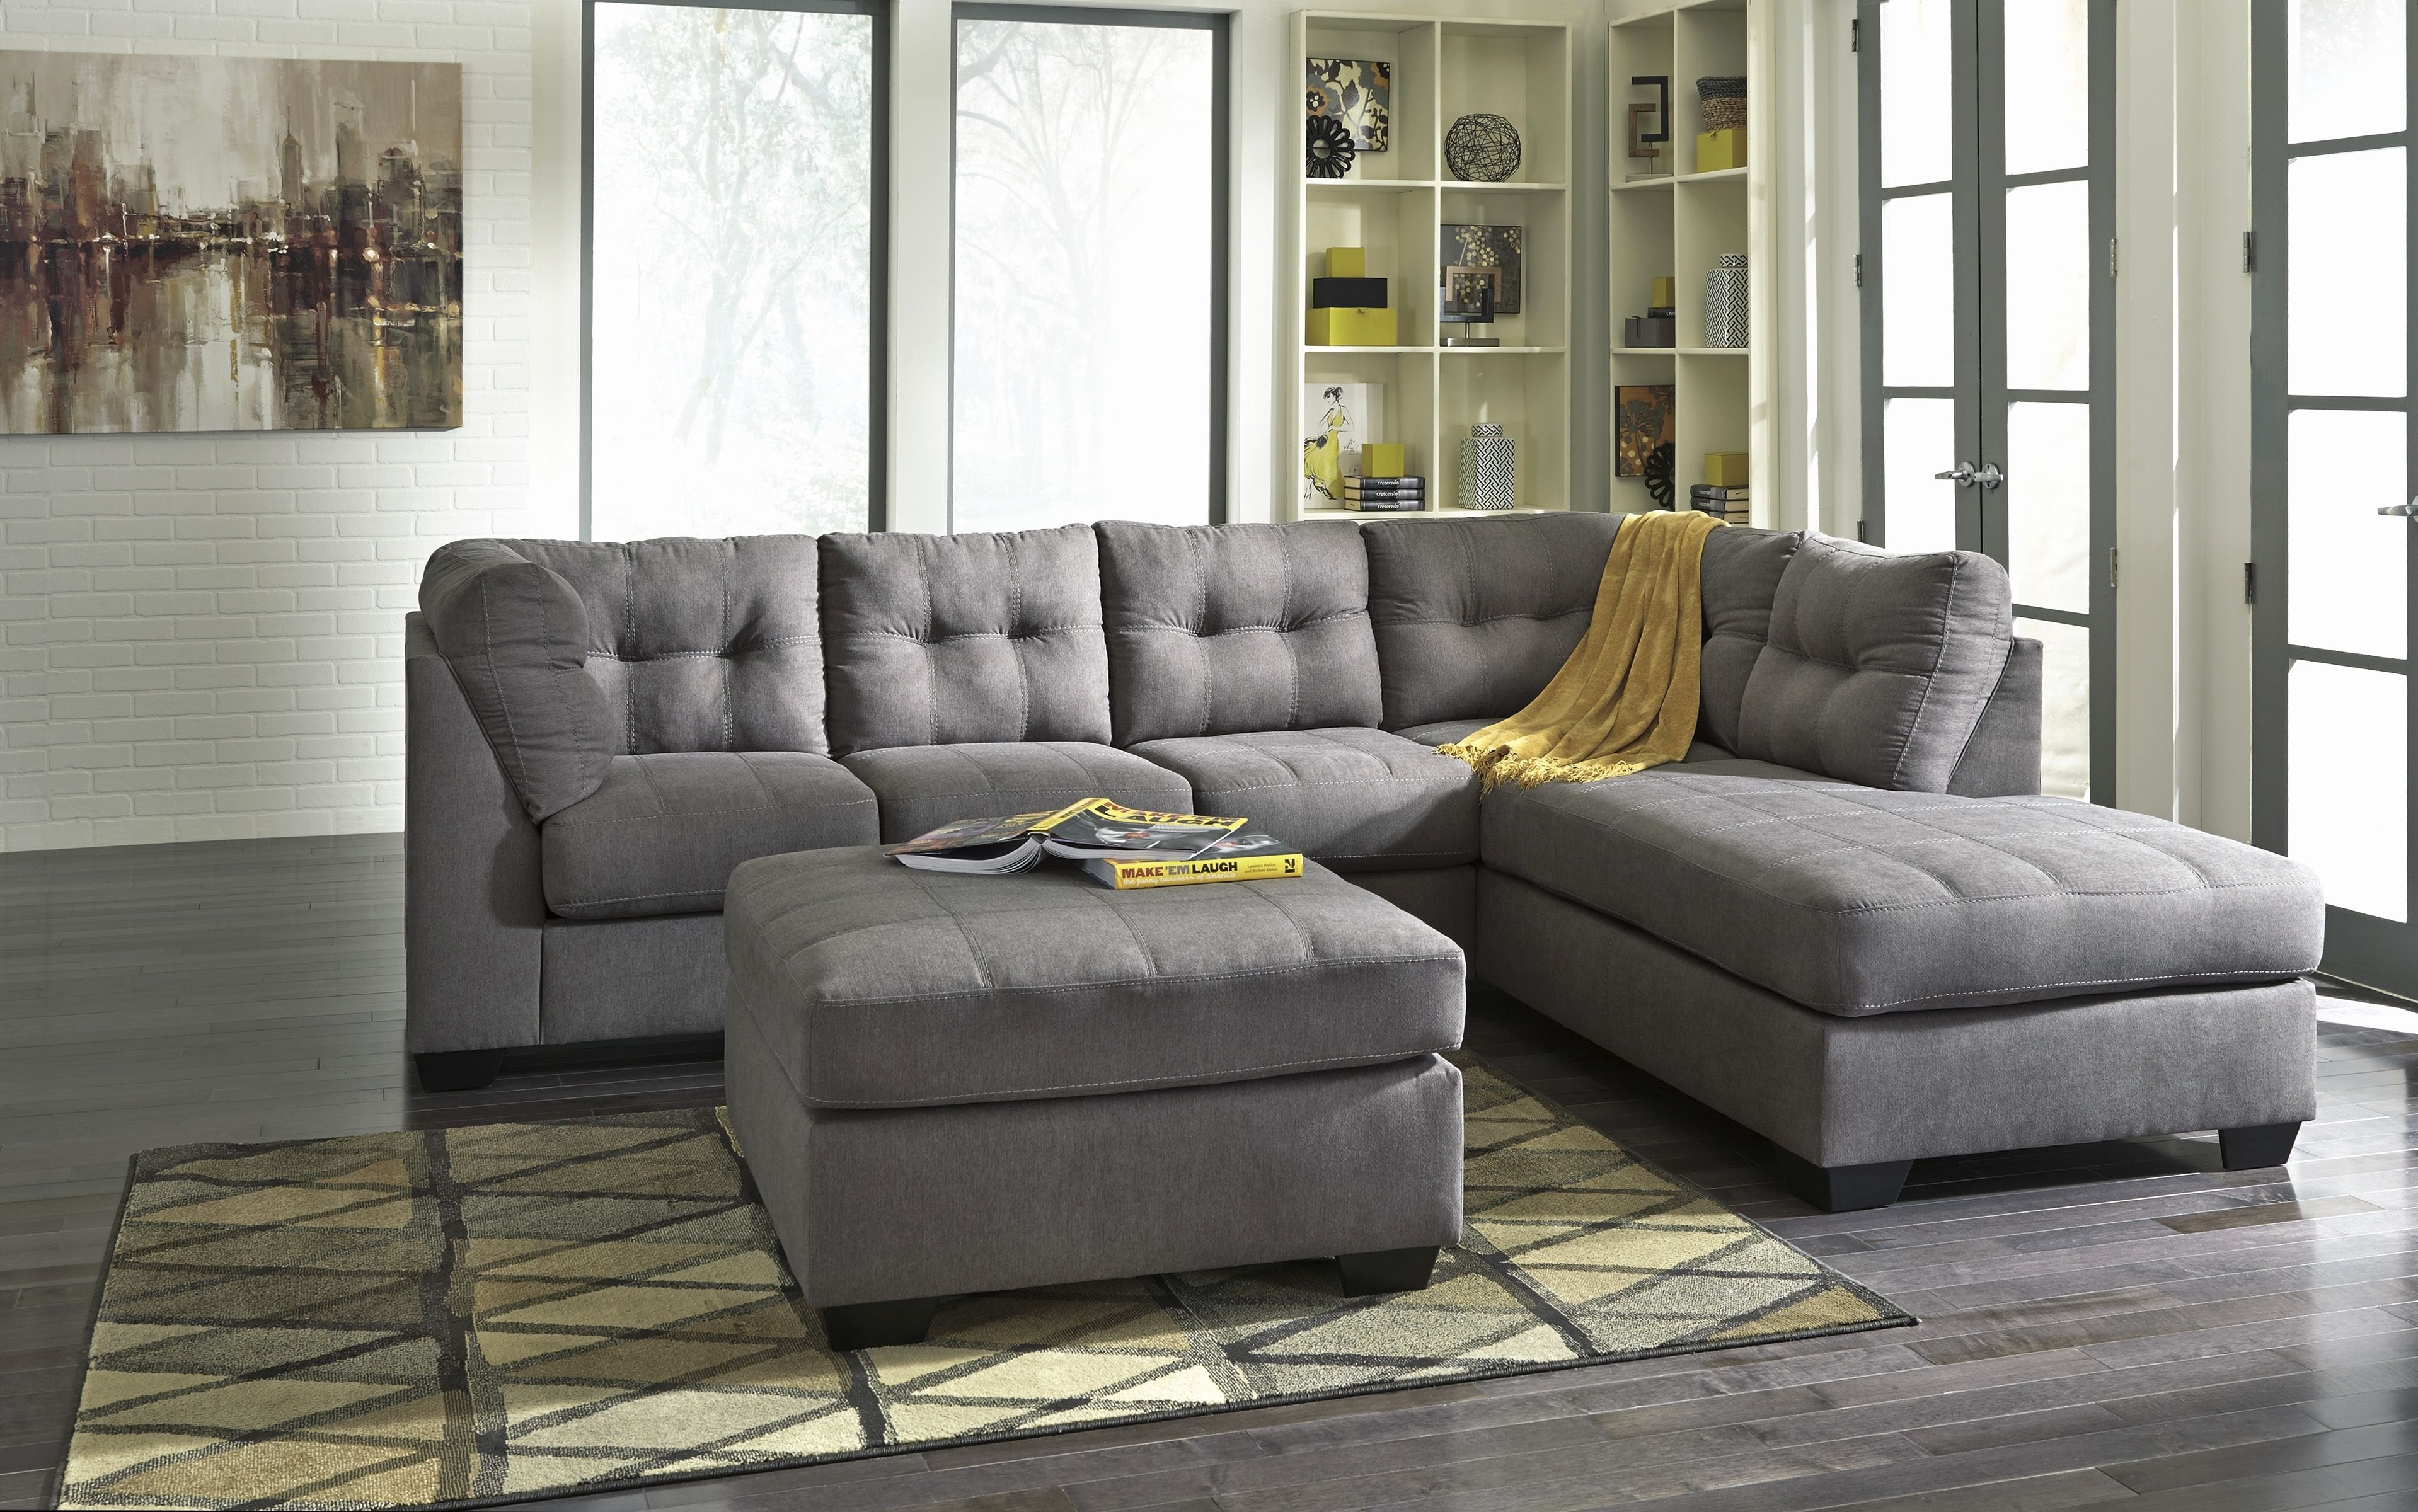 Grey Sectional Sofa Ashley Furniture 1025theparty Com With Sofas For Sectional Sofas At Ashley Furniture (View 4 of 10)